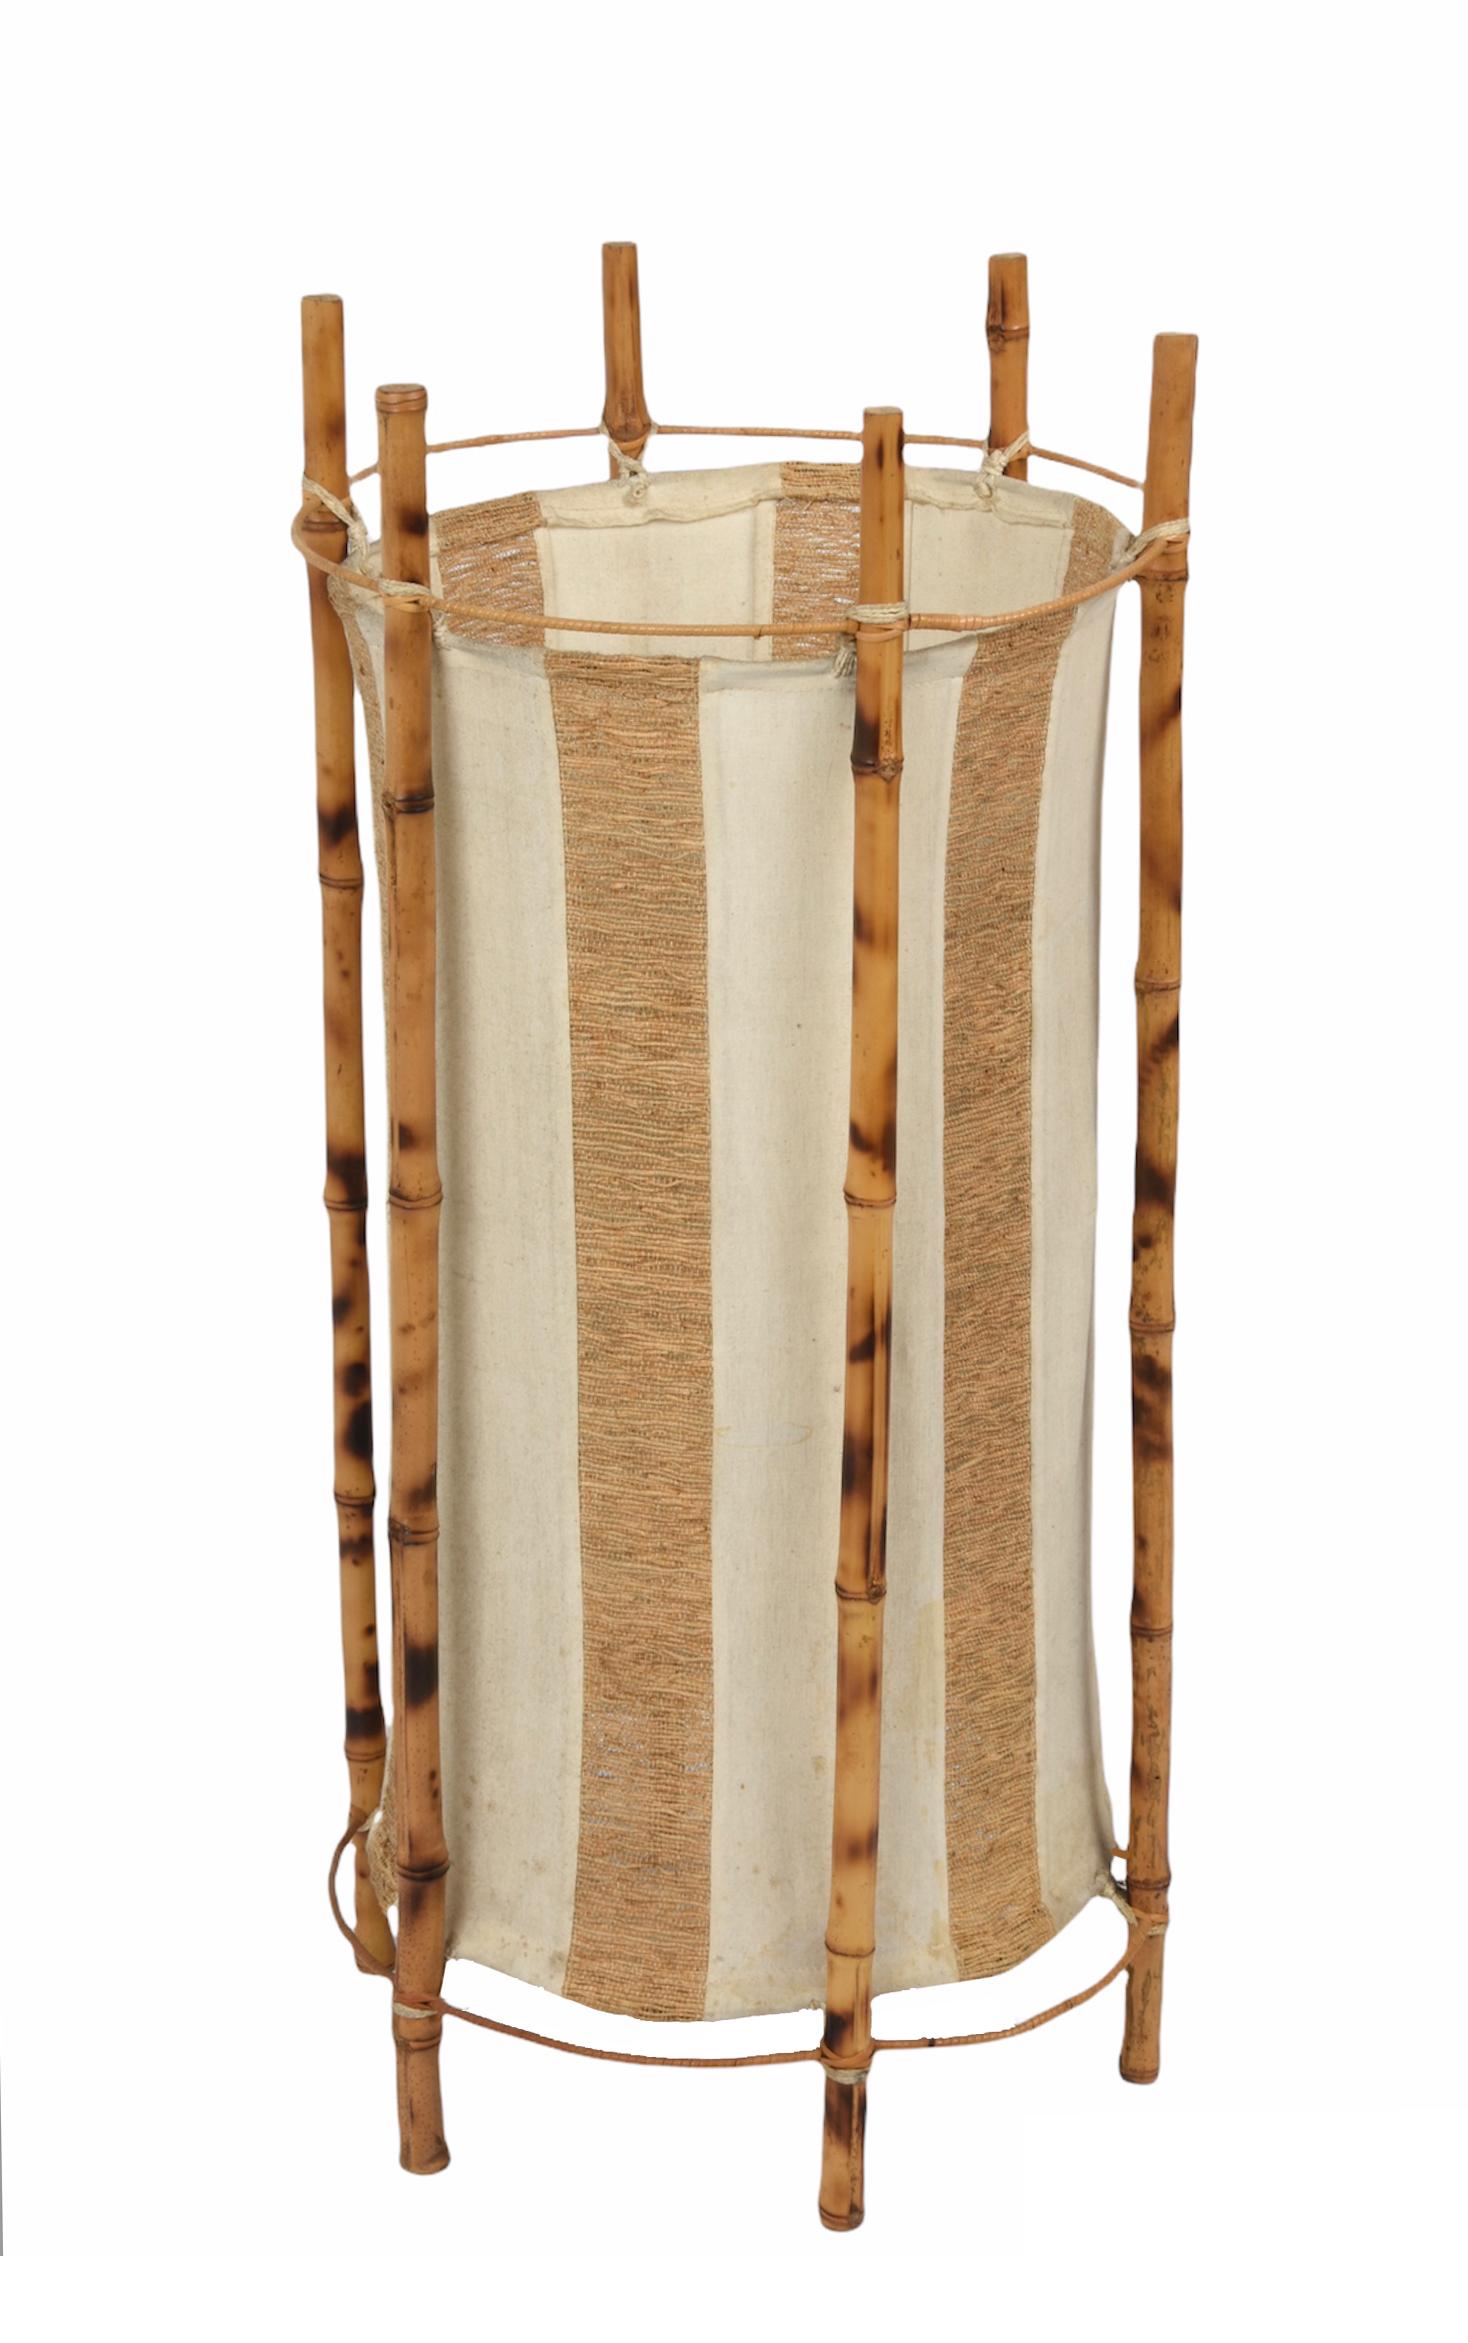 Louis Sognot Midcentury Cotton, Bamboo and Rattan Italian Floor Lamp, 1950s For Sale 2